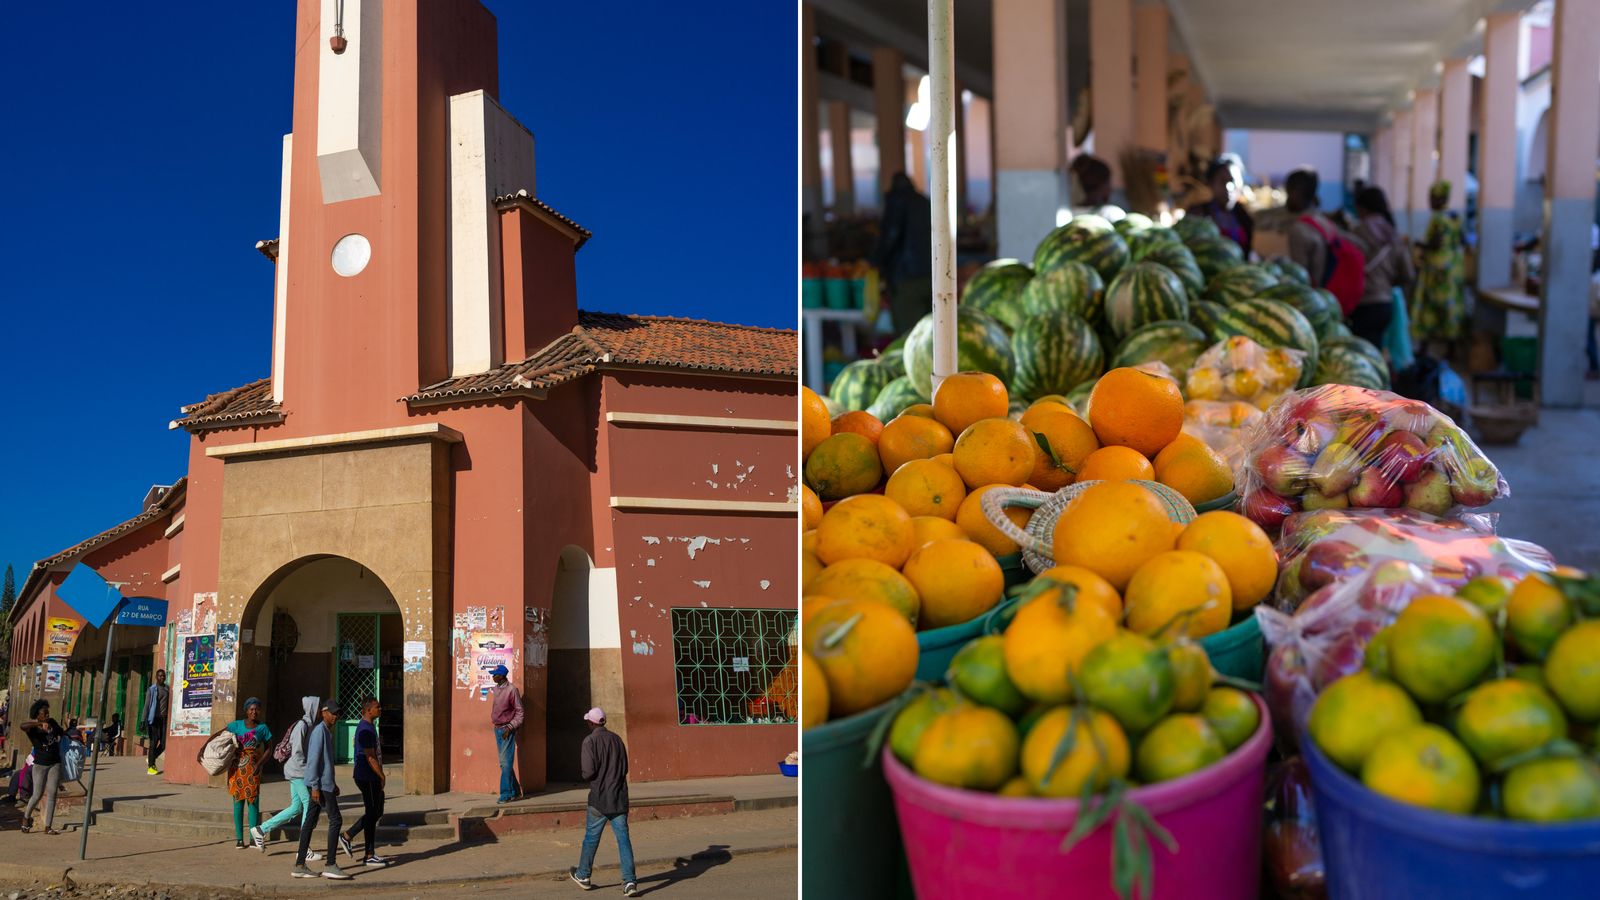 Left: PHWHM0 Old portuguese colonial central market entrance, Huila Province, Lubango, Angola / Right: PHWJMF Fruits sold in the central market, Huila Province, Lubango, Angola